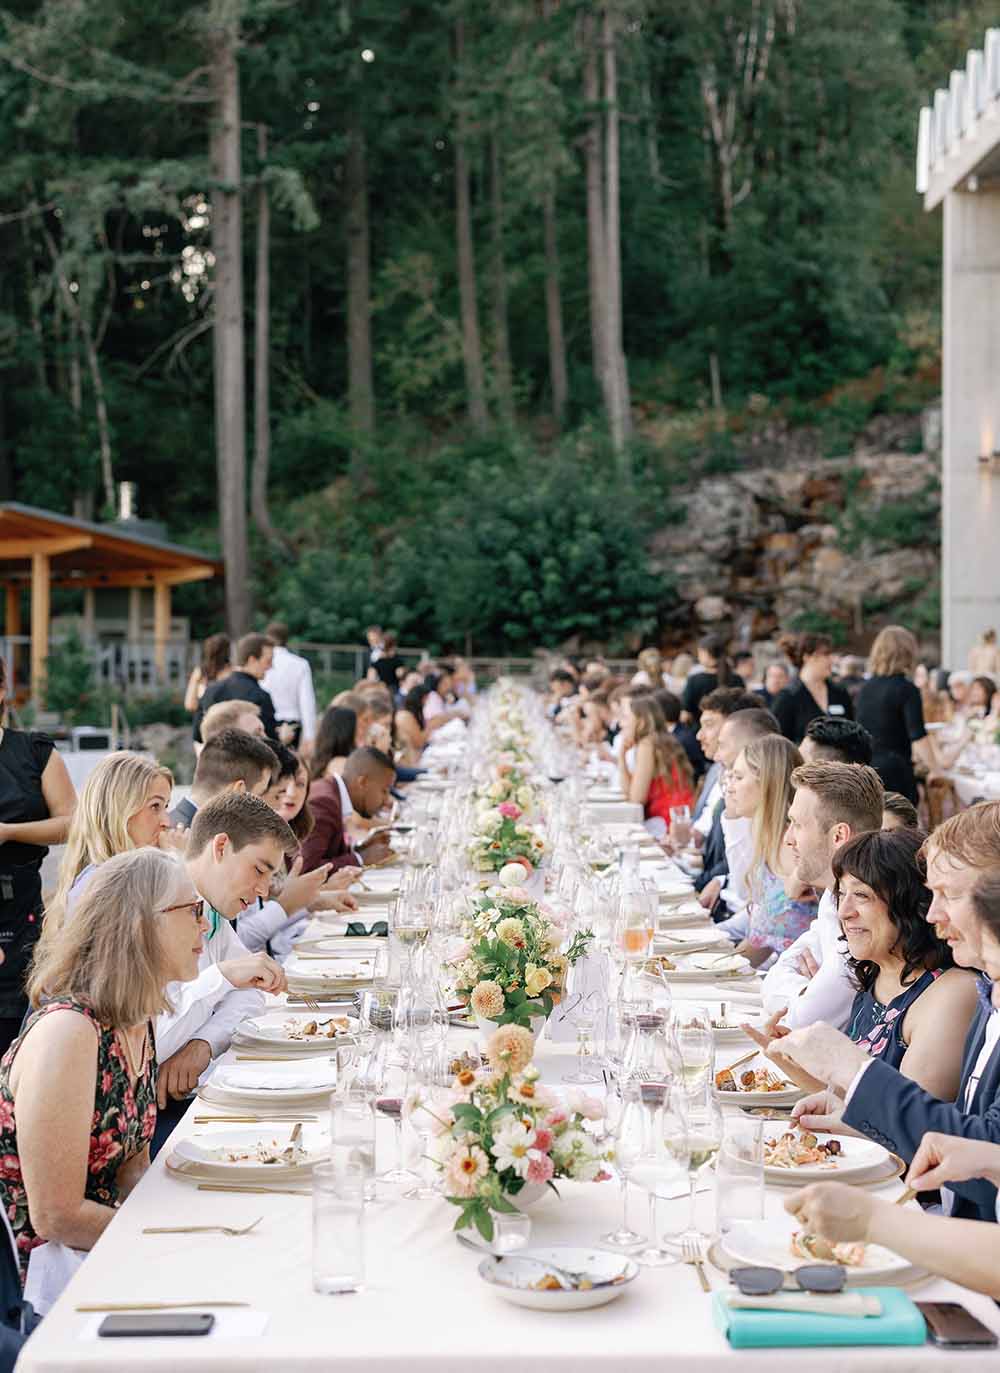 winery wedding banquet table with people eating